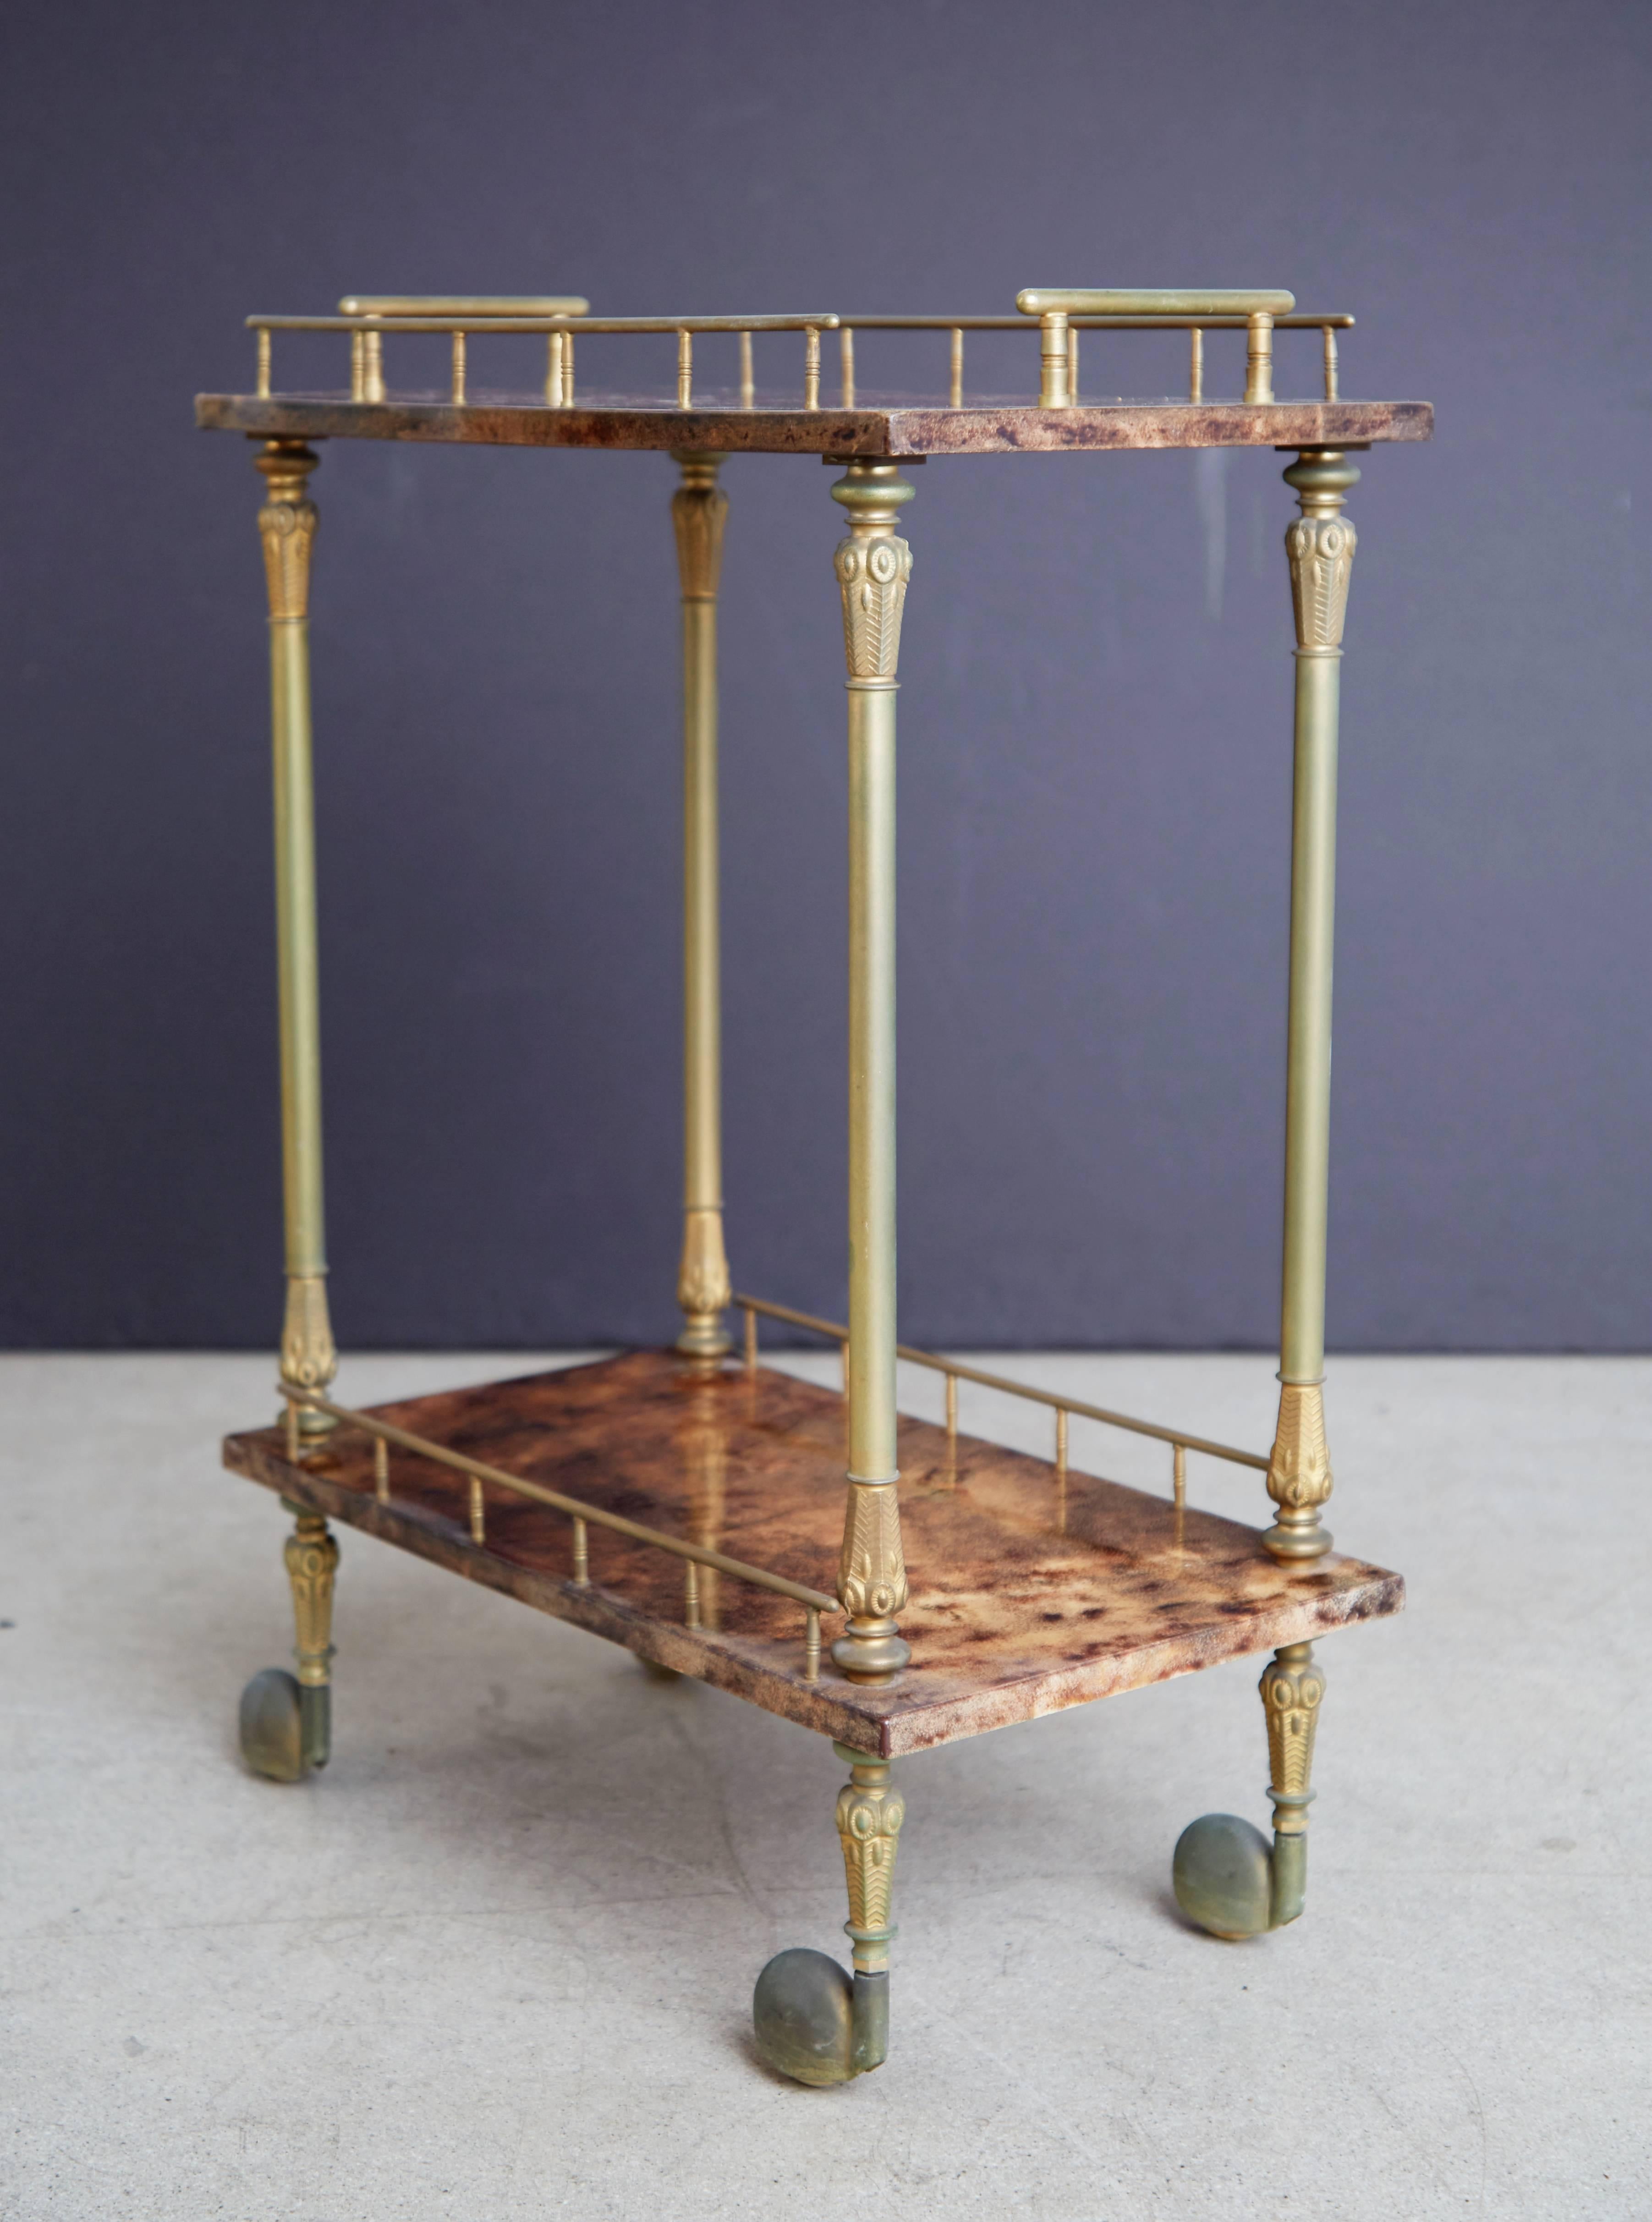 Beautiful petite bar cart by Italian artist-craftsman Aldo Tura, featuring the designers distinct use of goatskin that Tura was well-known for. The quality of Tura's craftsmanship can be attributed to the fact that his work was only produced in a